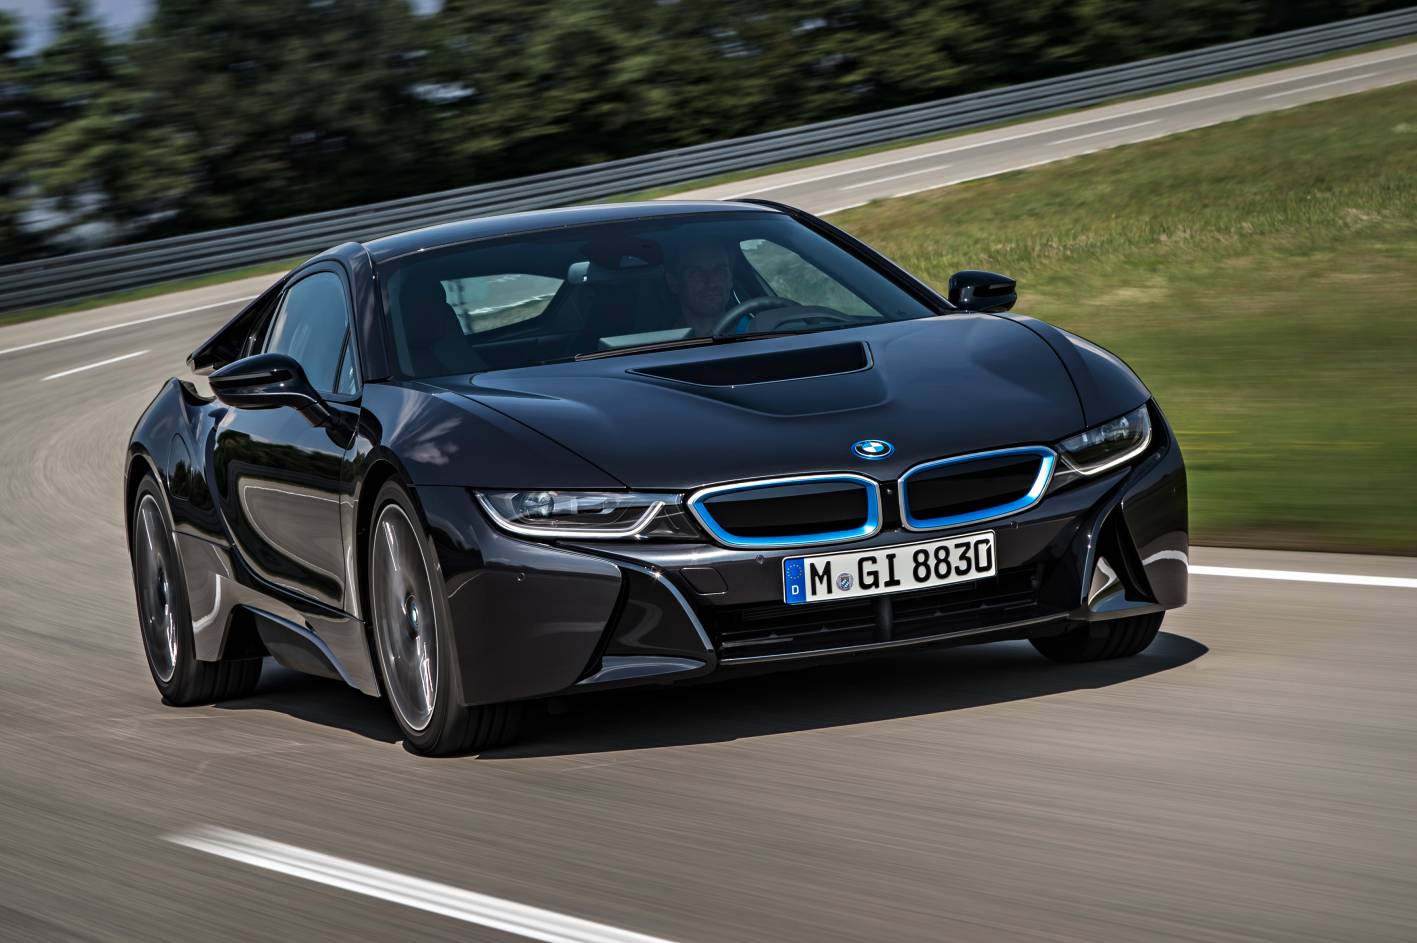 BMW i8 deliveries start in June, final specs announced